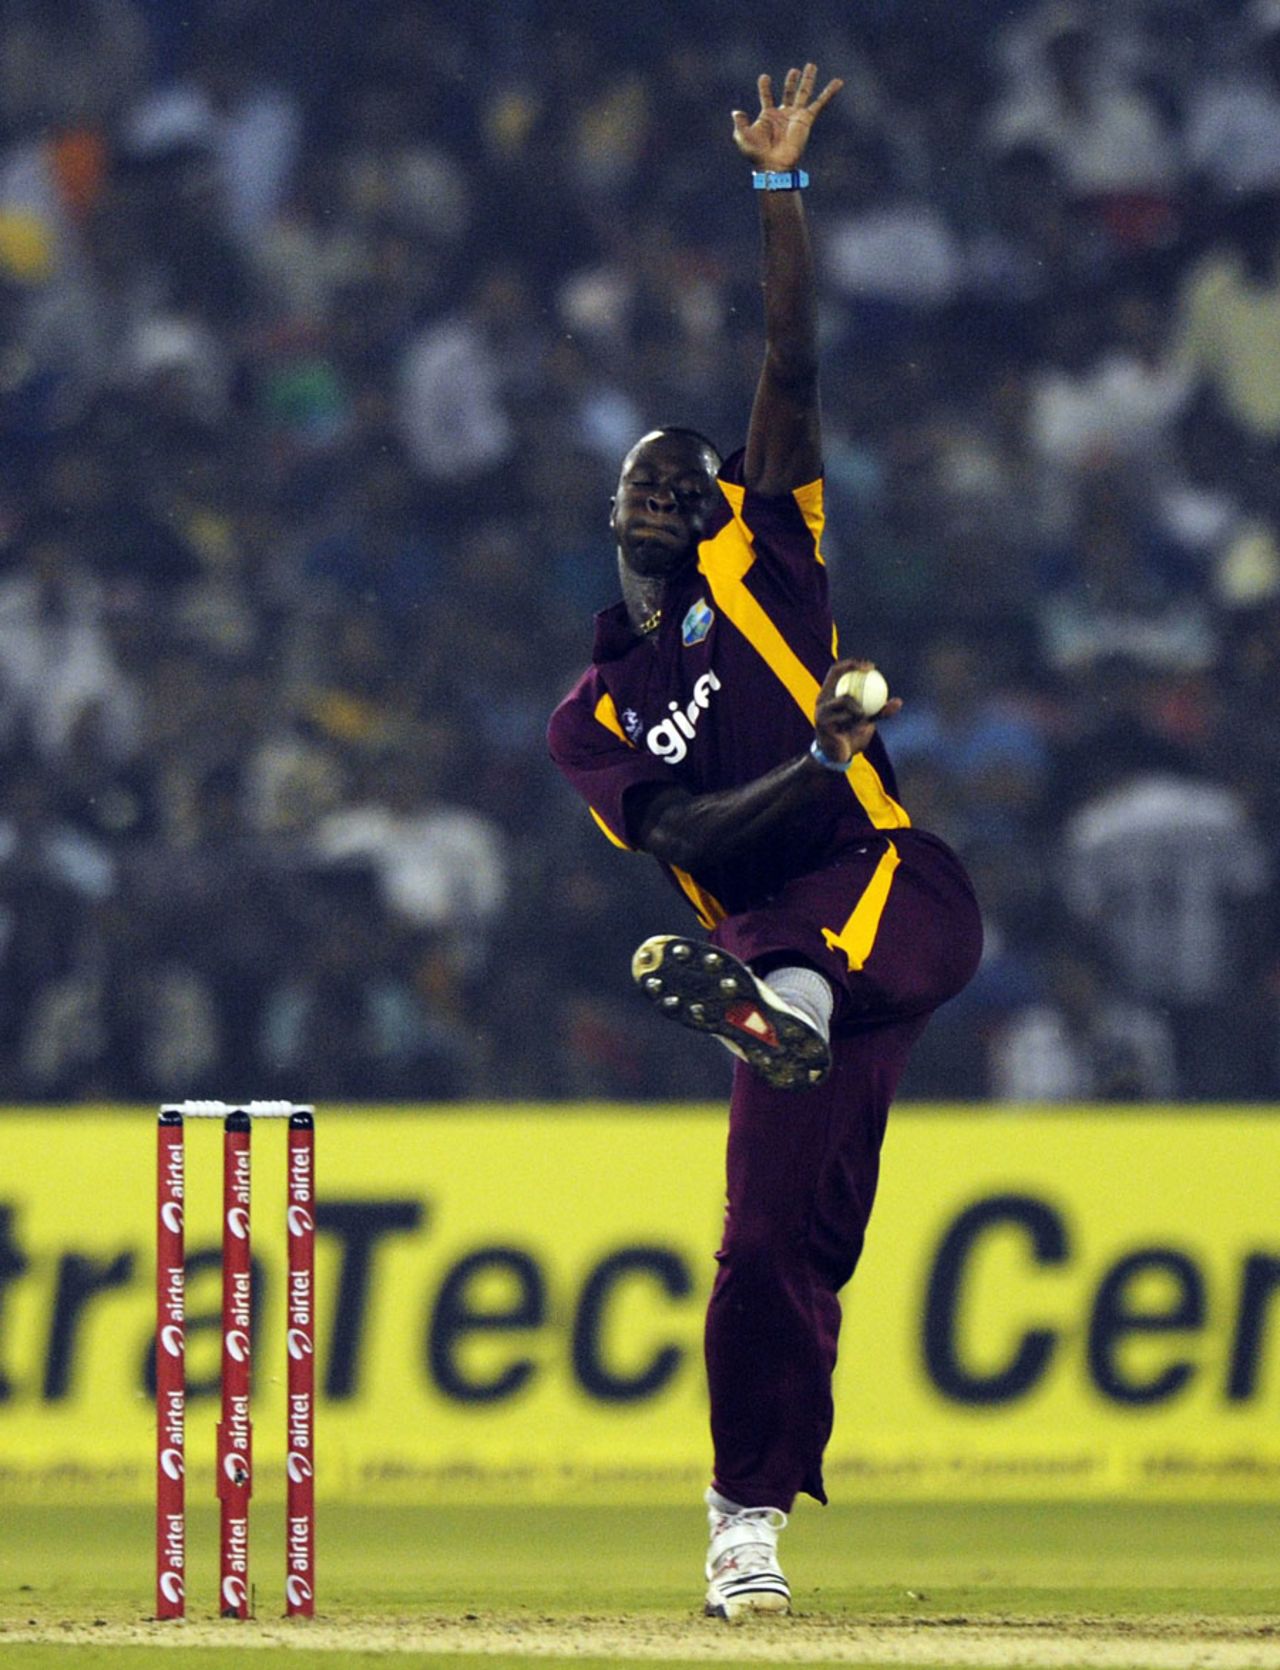 Kemar Roach in his delivery stride, India v West Indies, 1st ODI, Cuttack, November 29, 2011